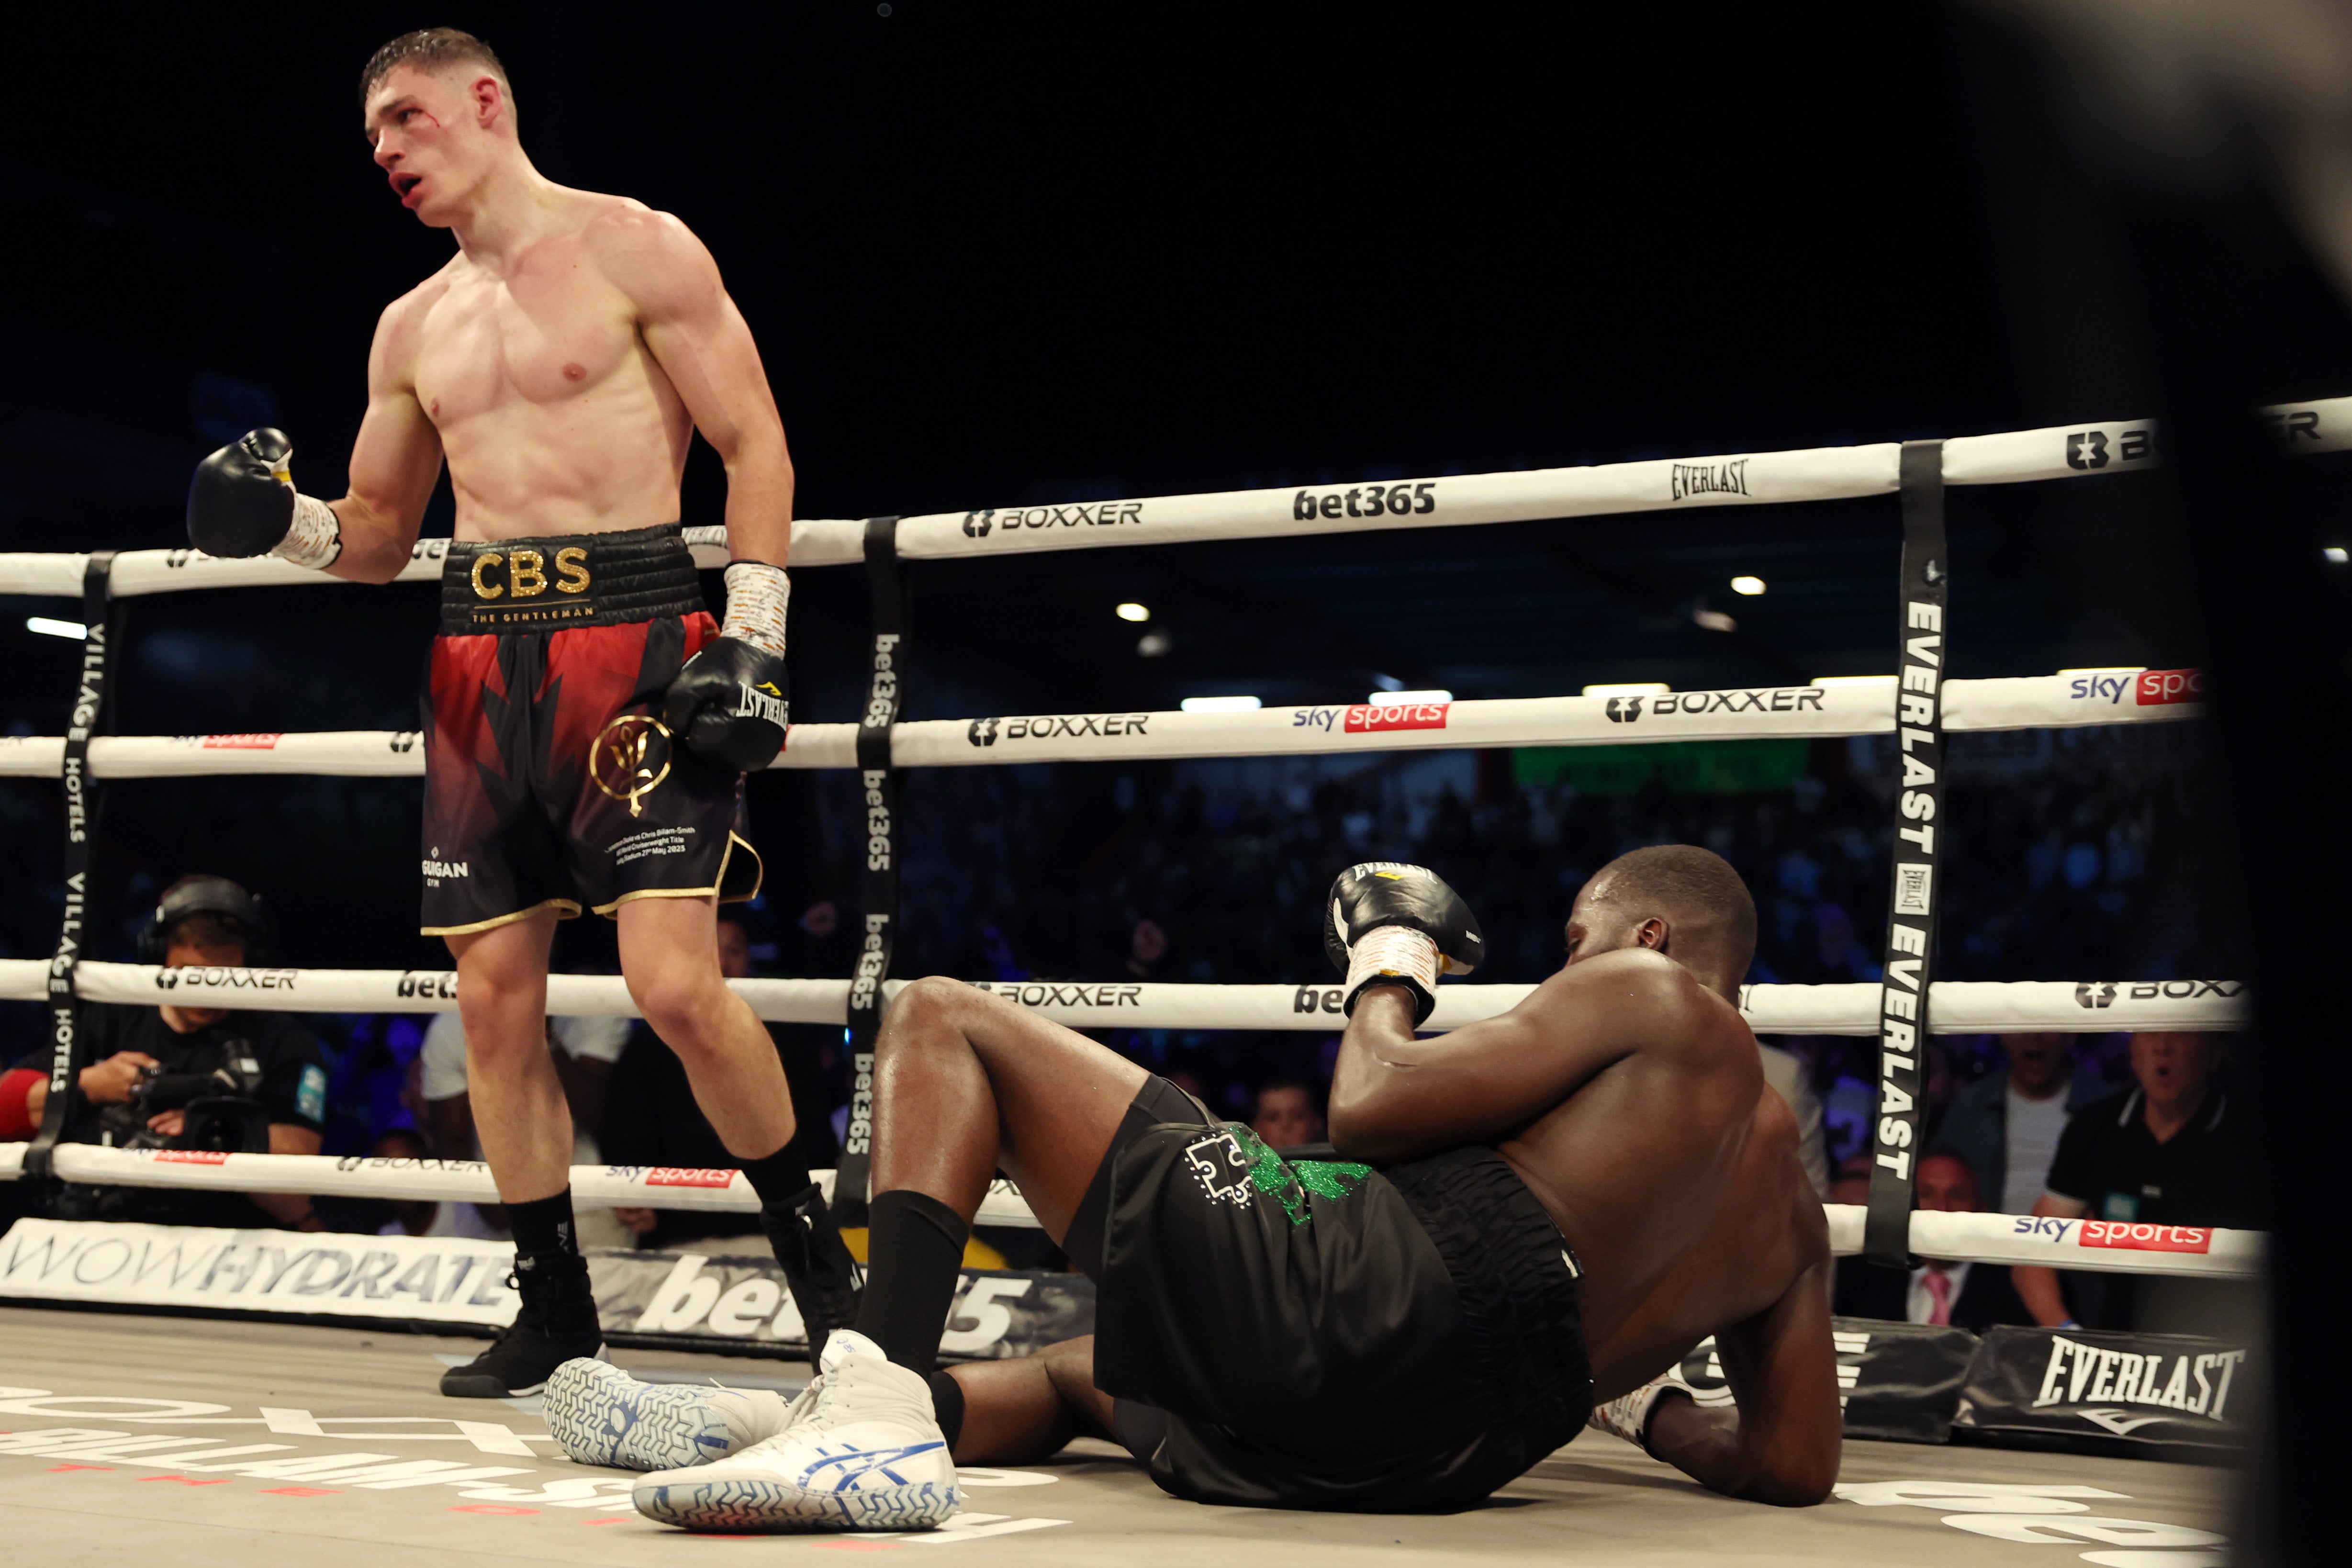 Billam-Smith dropped ex-teammate Lawrence Okolie three times en route to a points win